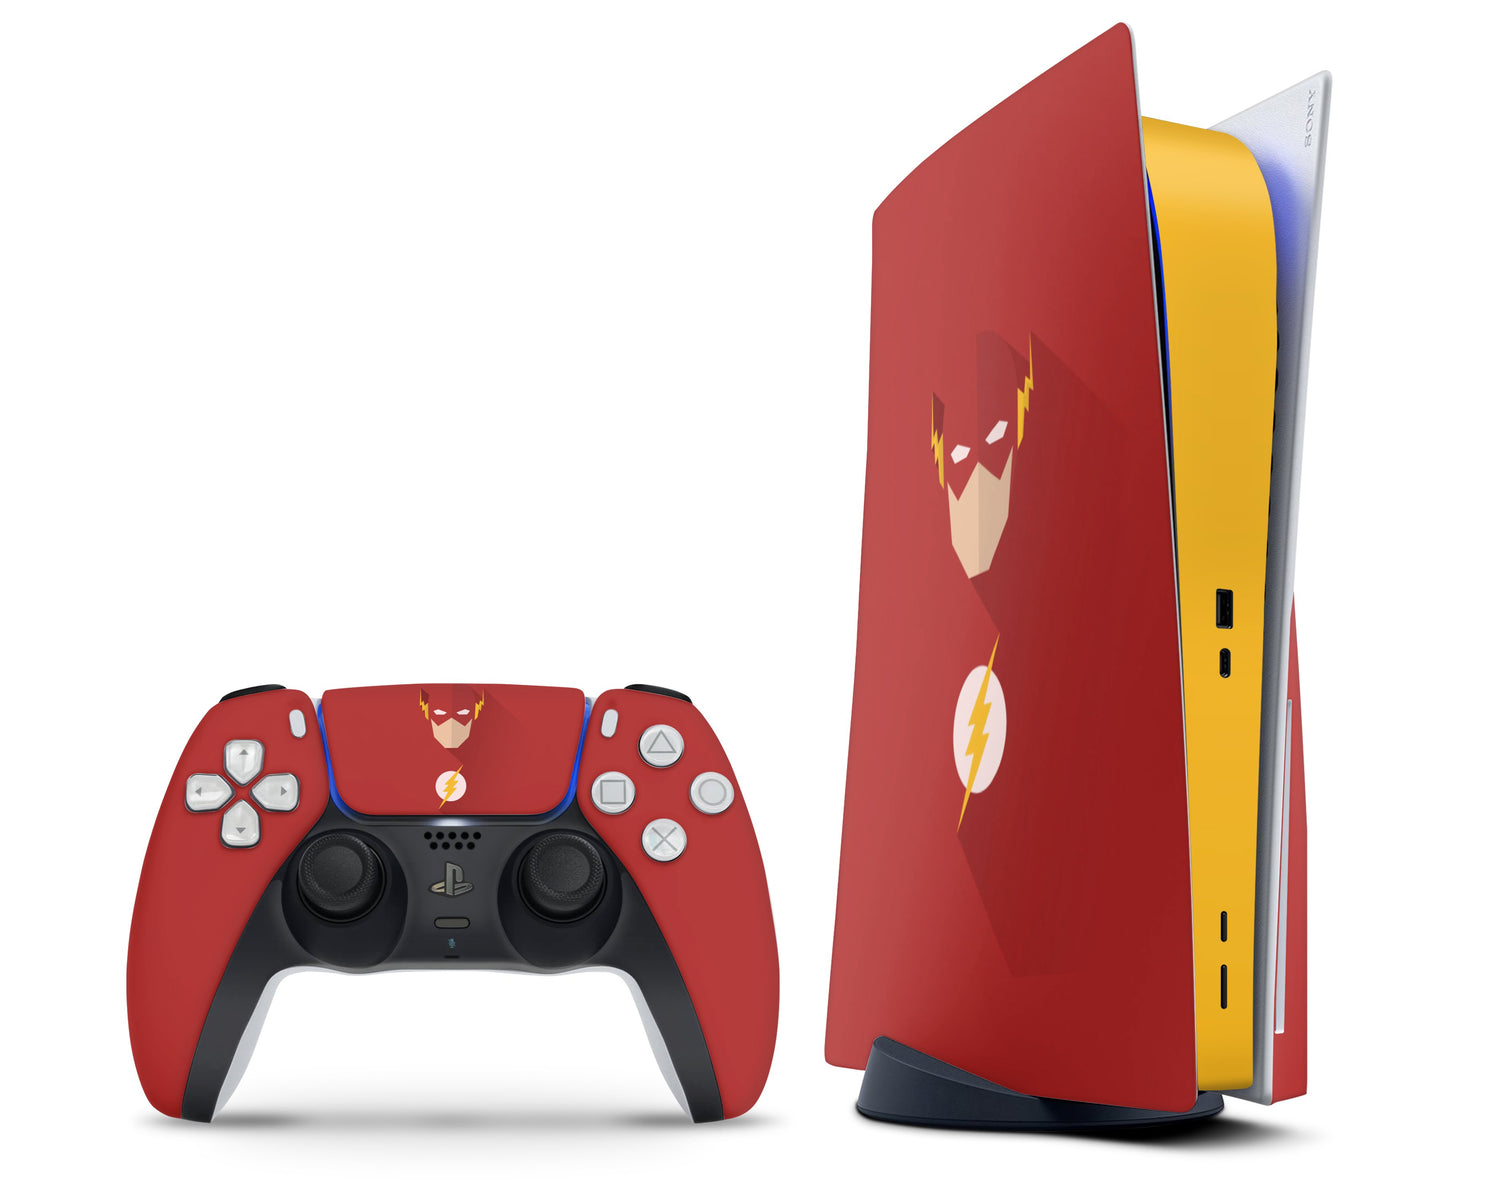 The Flash PS5 Skin